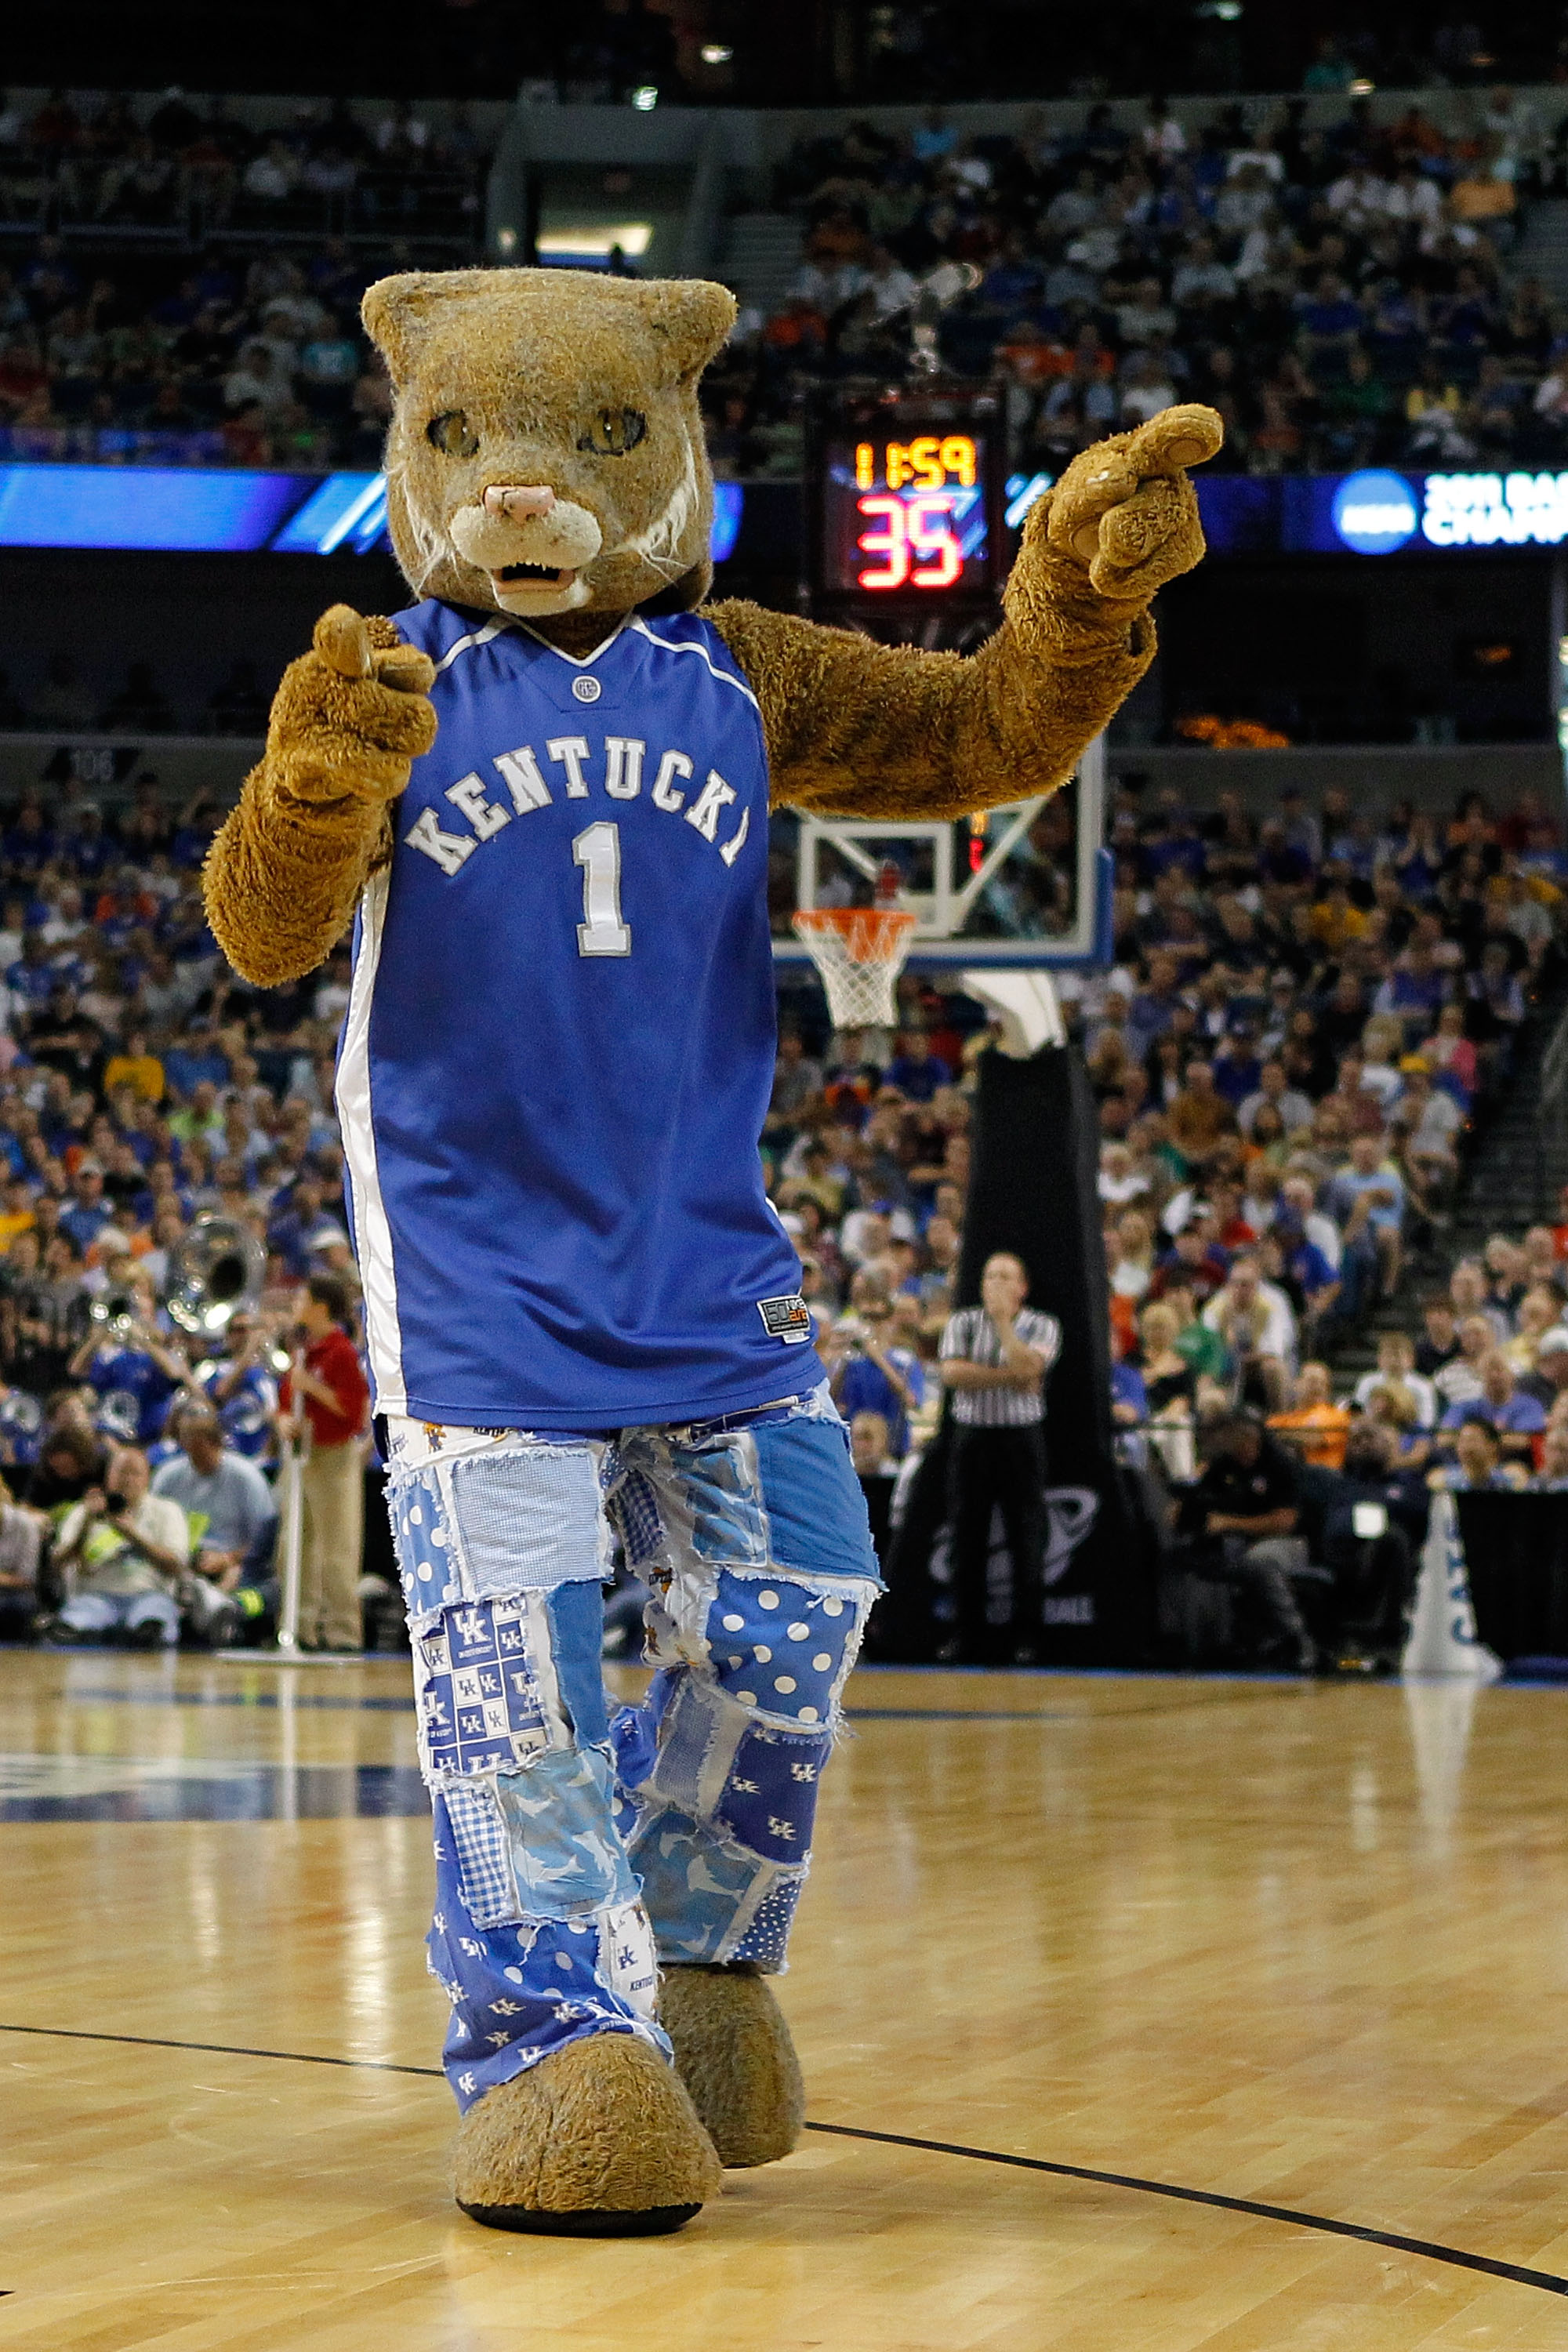 TAMPA, FL - MARCH 19:  The mascot for the Kentucky Wildcats performs against the West Virginia Mountaineers during the third round of the 2011 NCAA men's basketball tournament at St. Pete Times Forum on March 19, 2011 in Tampa, Florida. Kentucky won 71-63